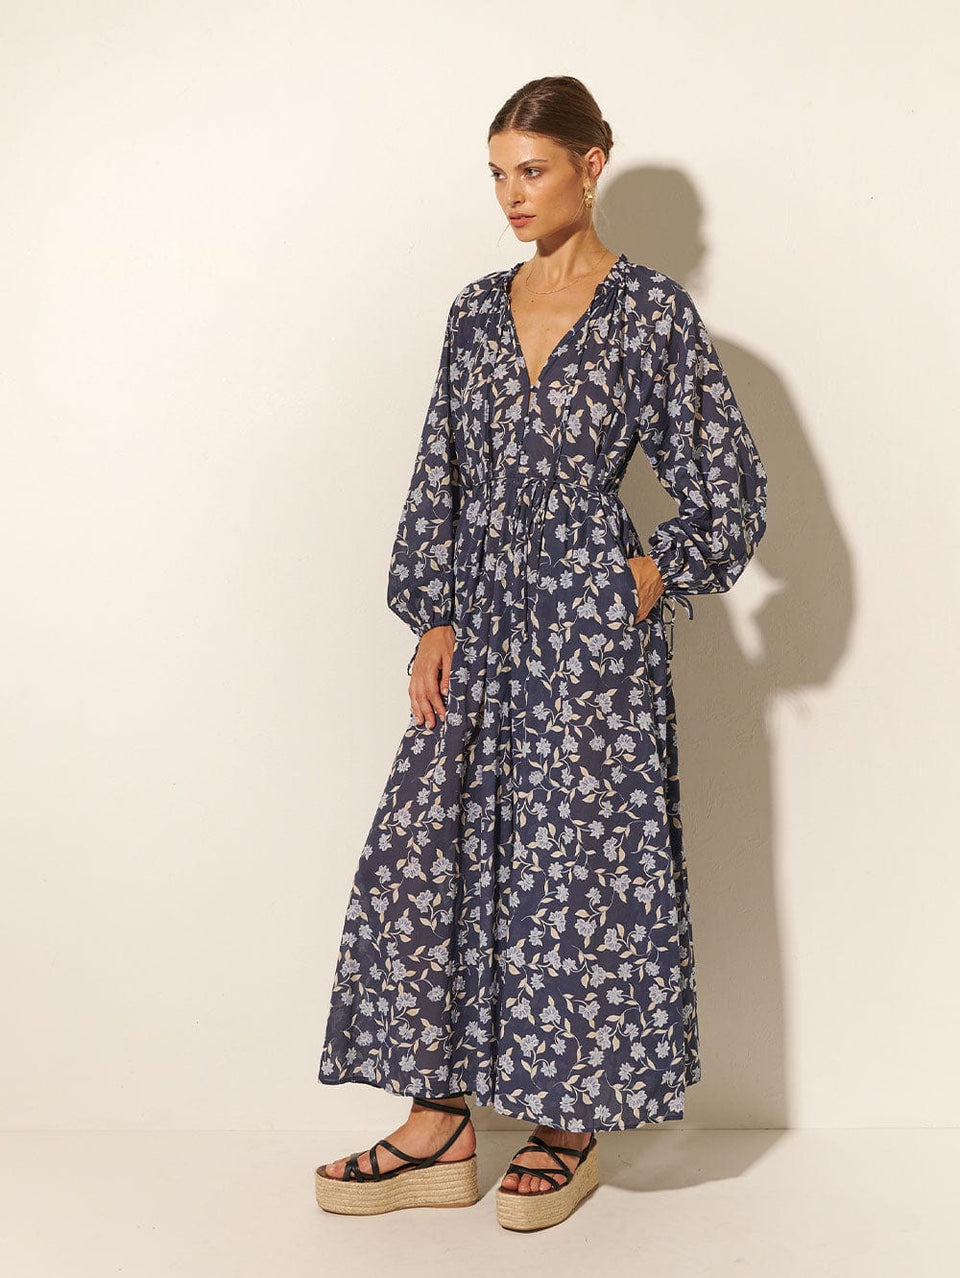 Studio model wears KIVARI Jeanne Maxi Dress: A navy and sky blue floral dress made from cotton and featuring a button front, waist tie, full-length blouson sleeves and frill collar detail.